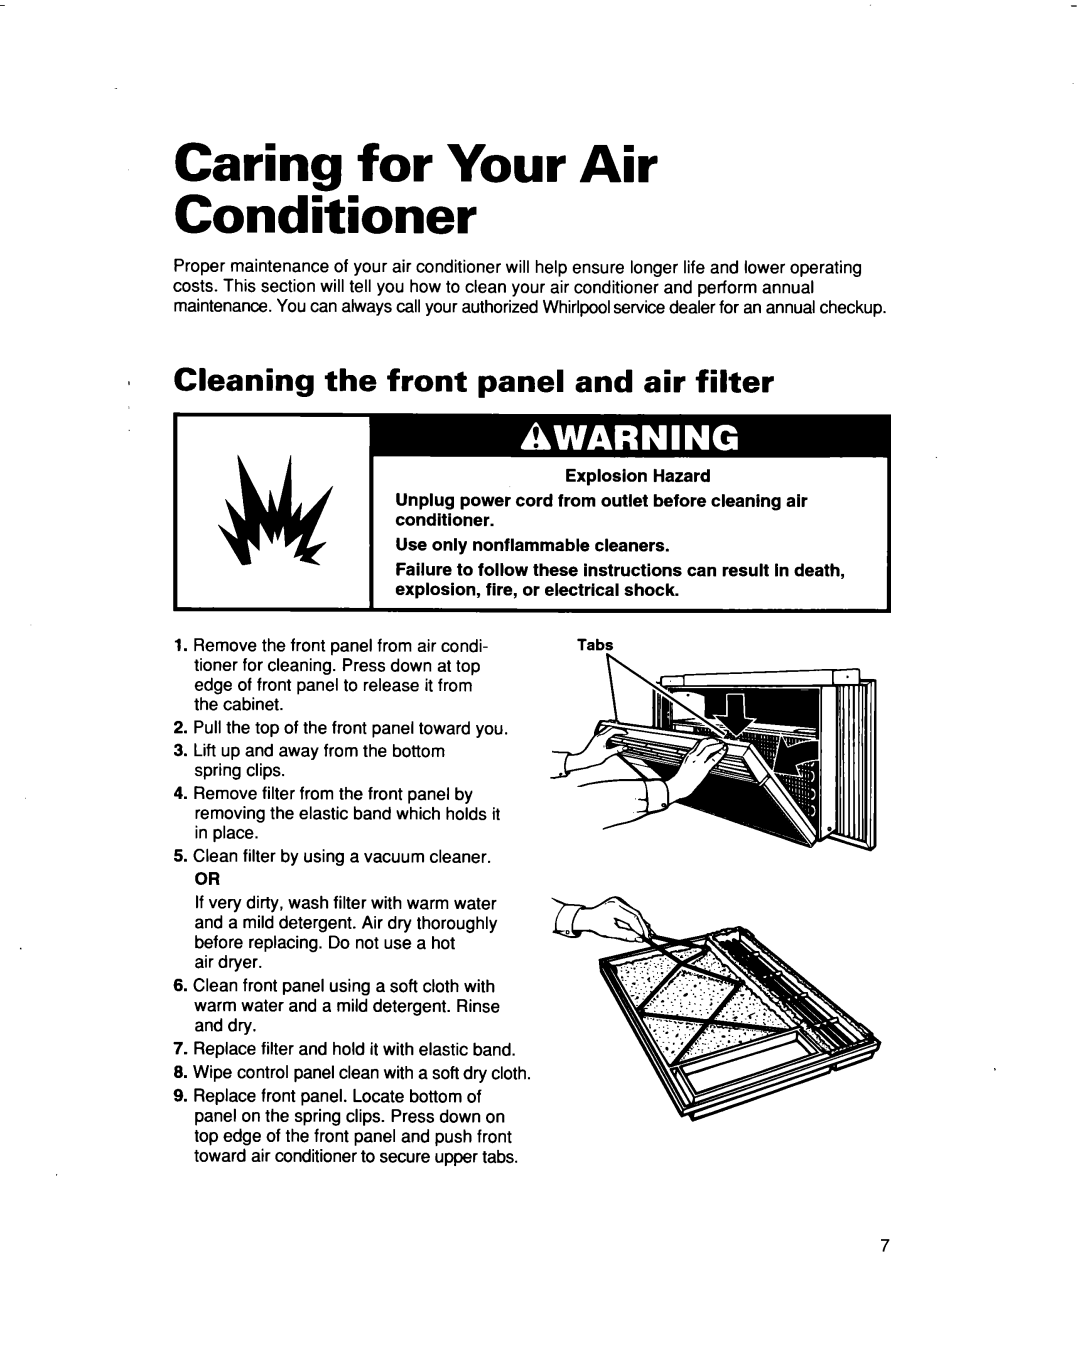 Whirlpool AR0700XA, AR0500XA warranty Caring for Your Air Conditioner, l Cleaning the front panel and air filter 